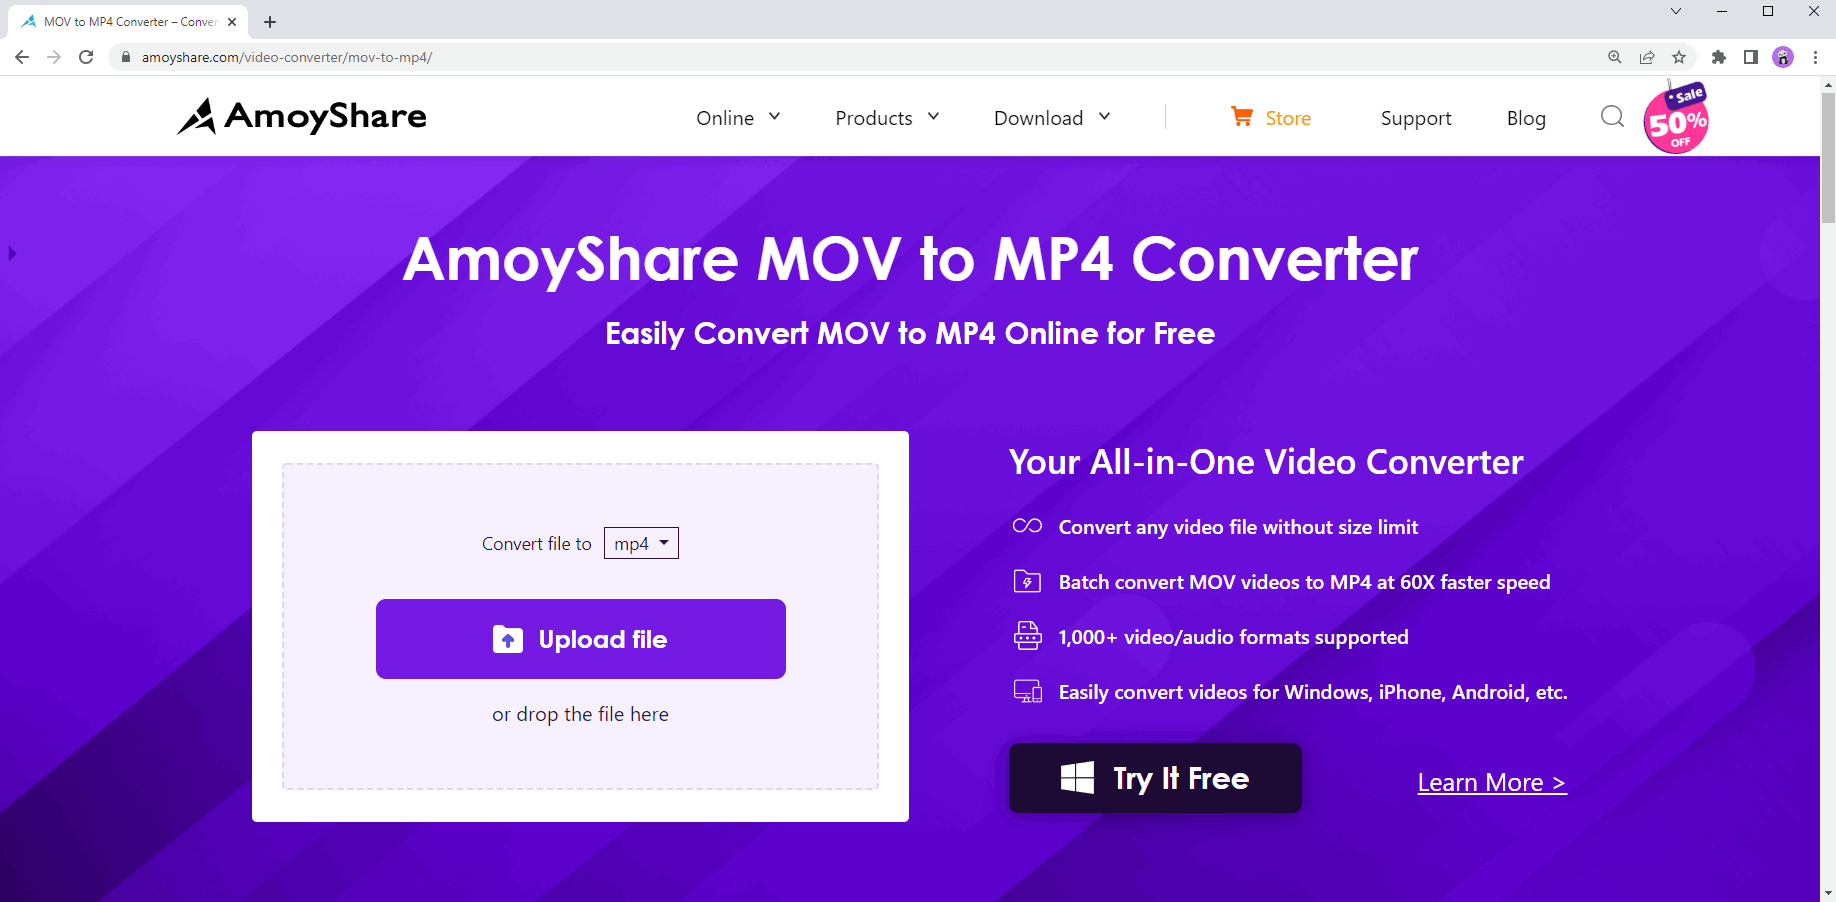 Head to the AmoyShare MOV to MP4 converter